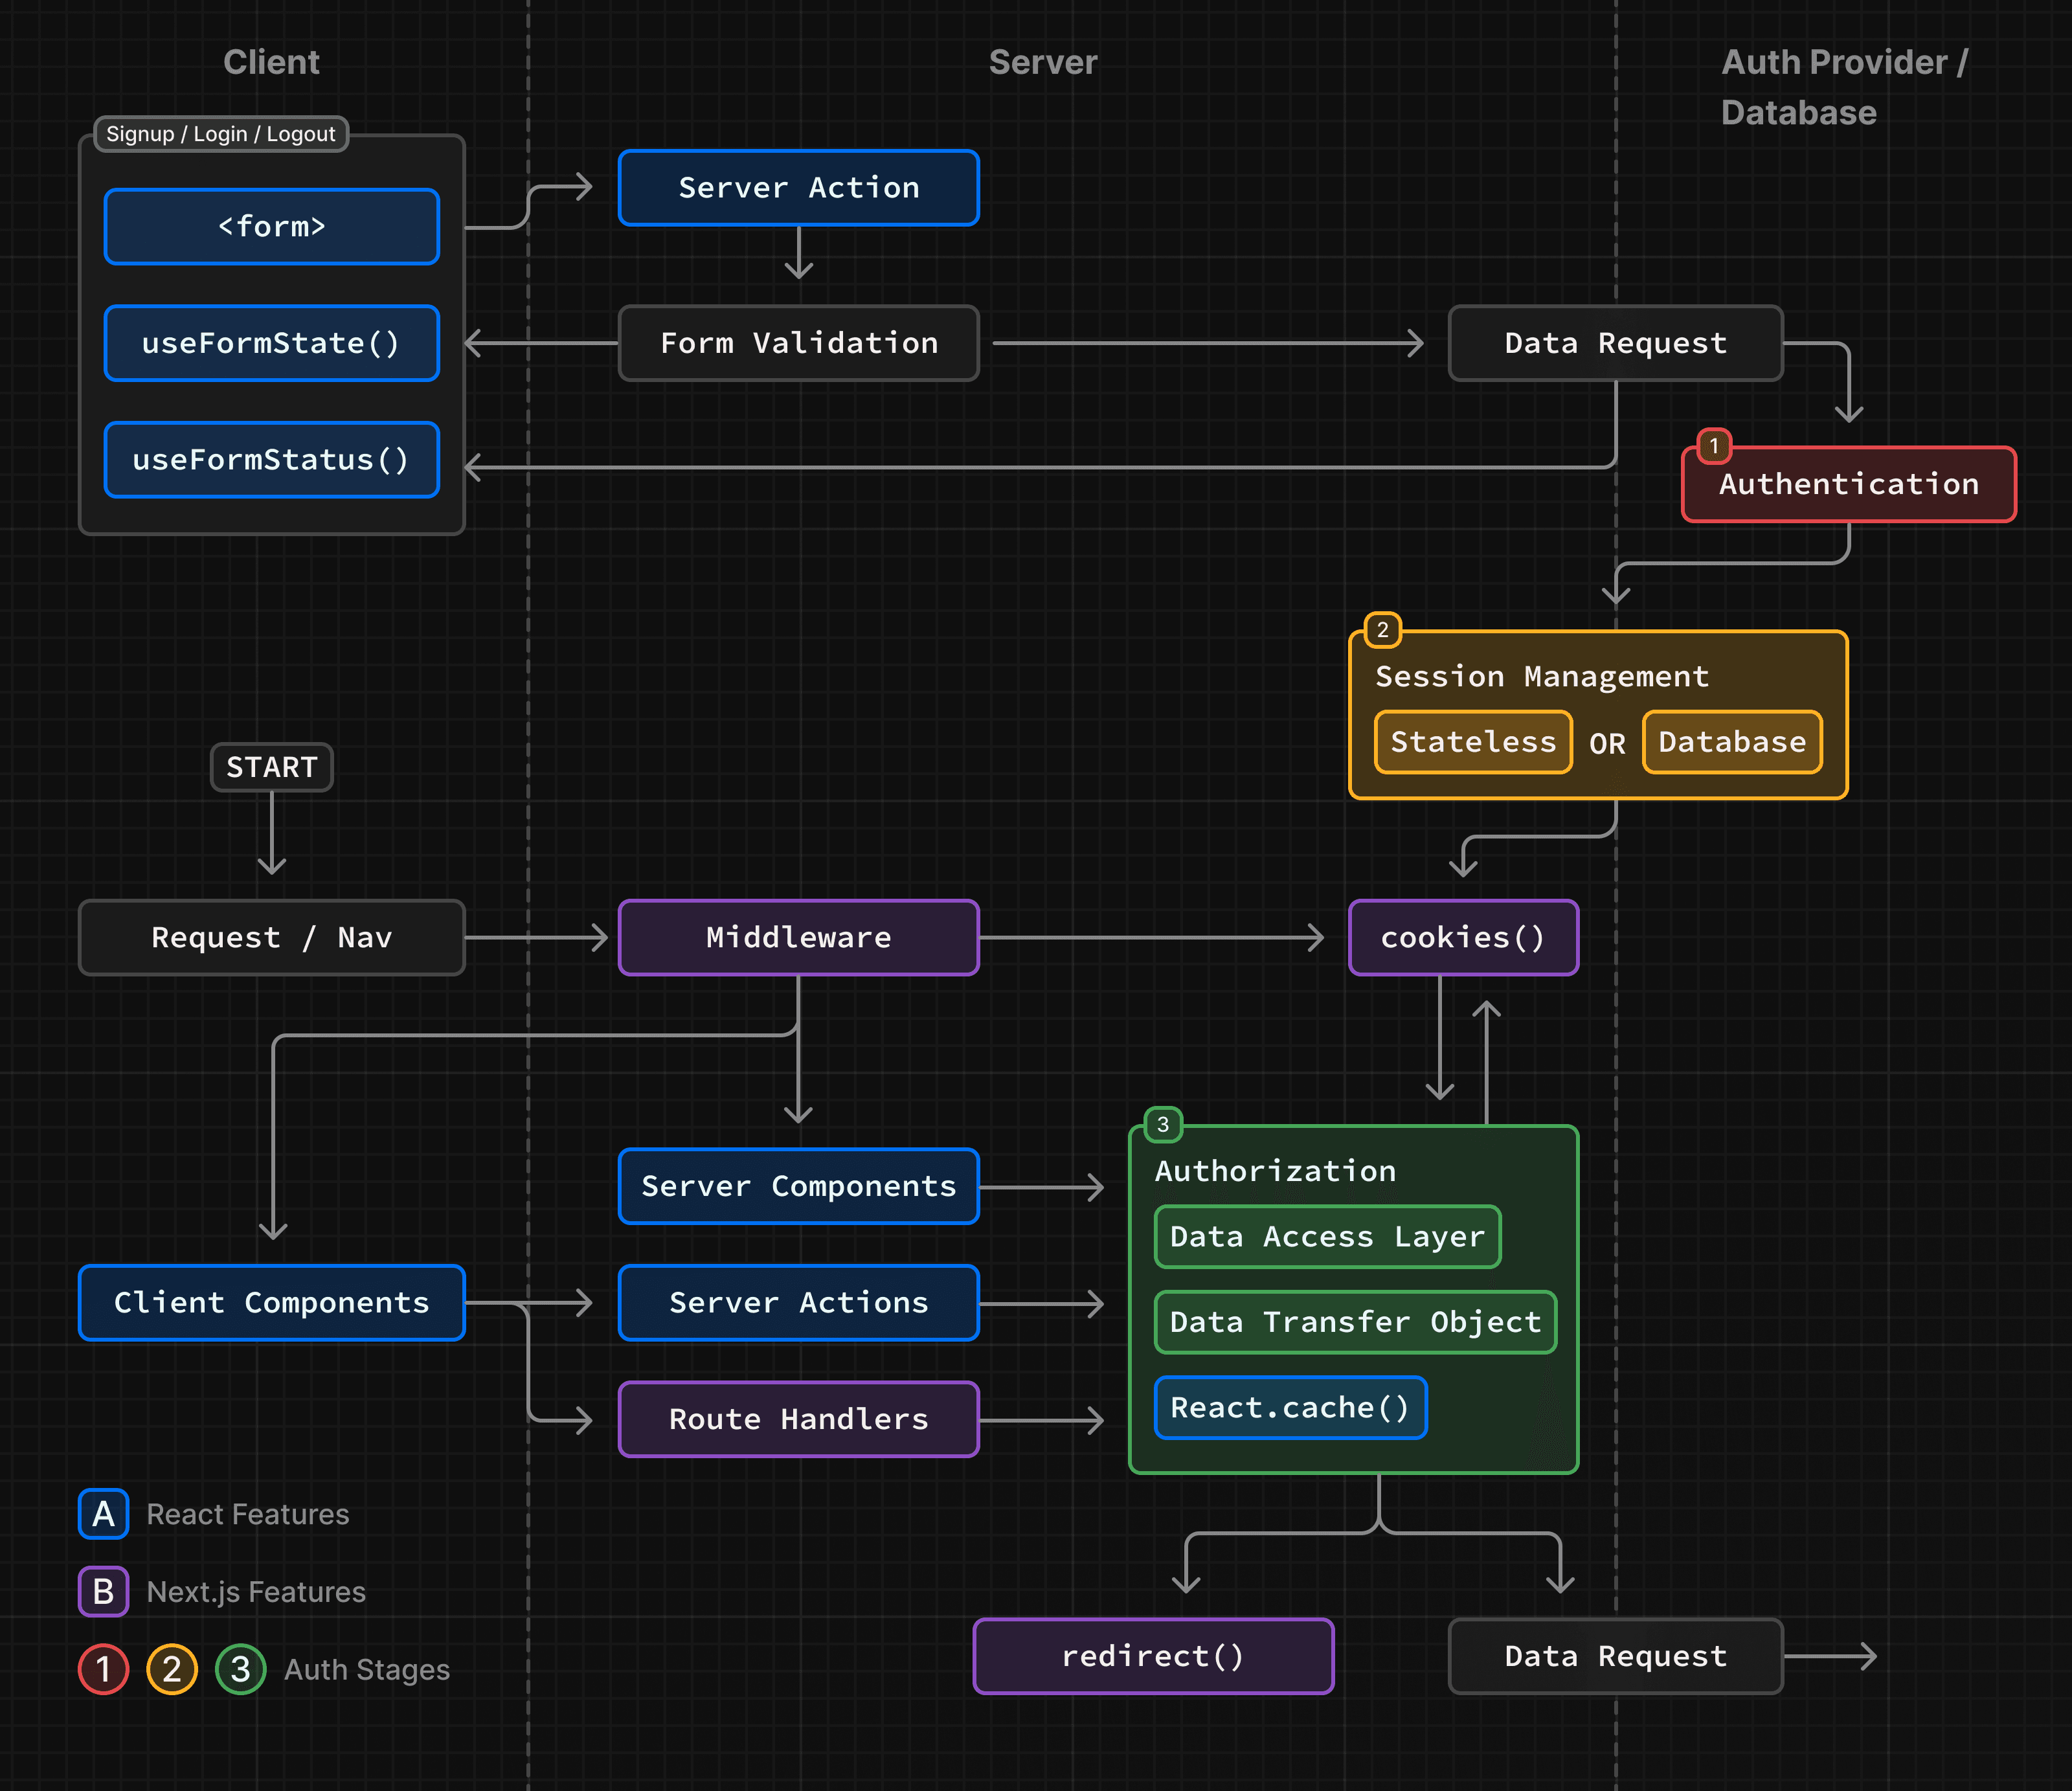 Diagram showing the authentication flow with React and Next.js features